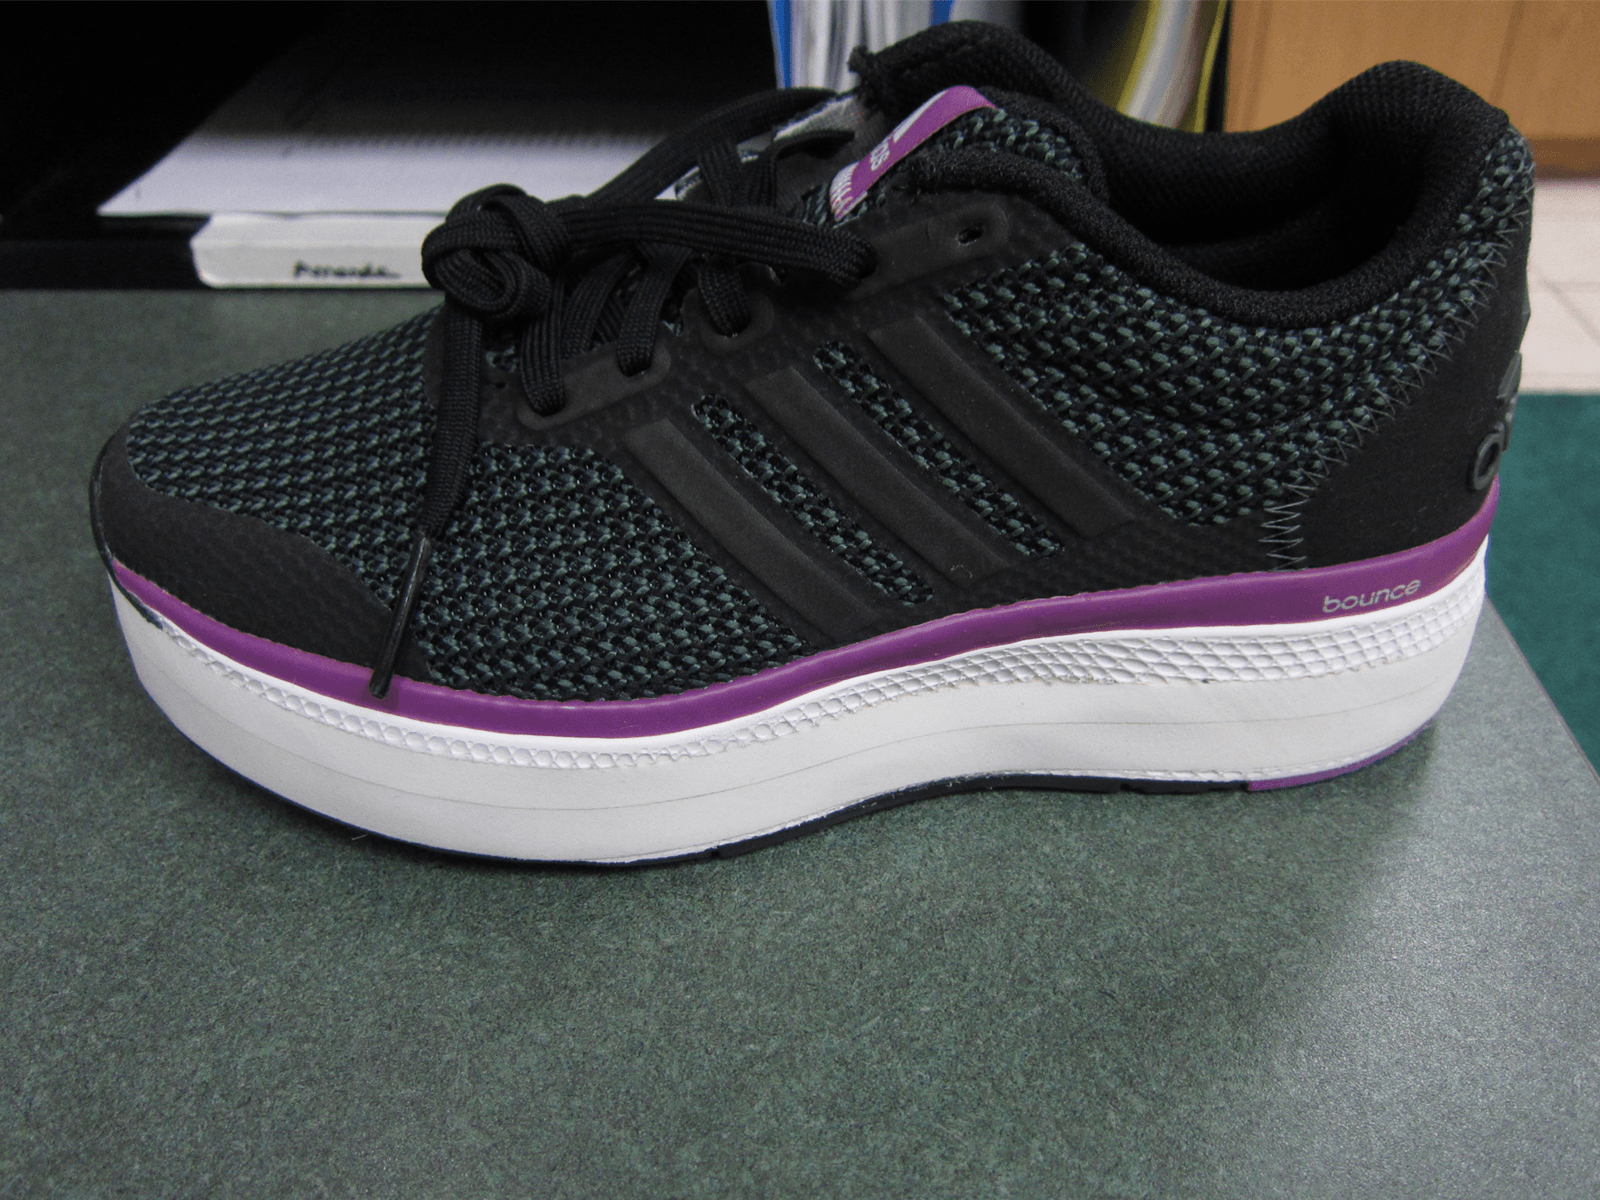 Shoes from Walking Mobility Clinics